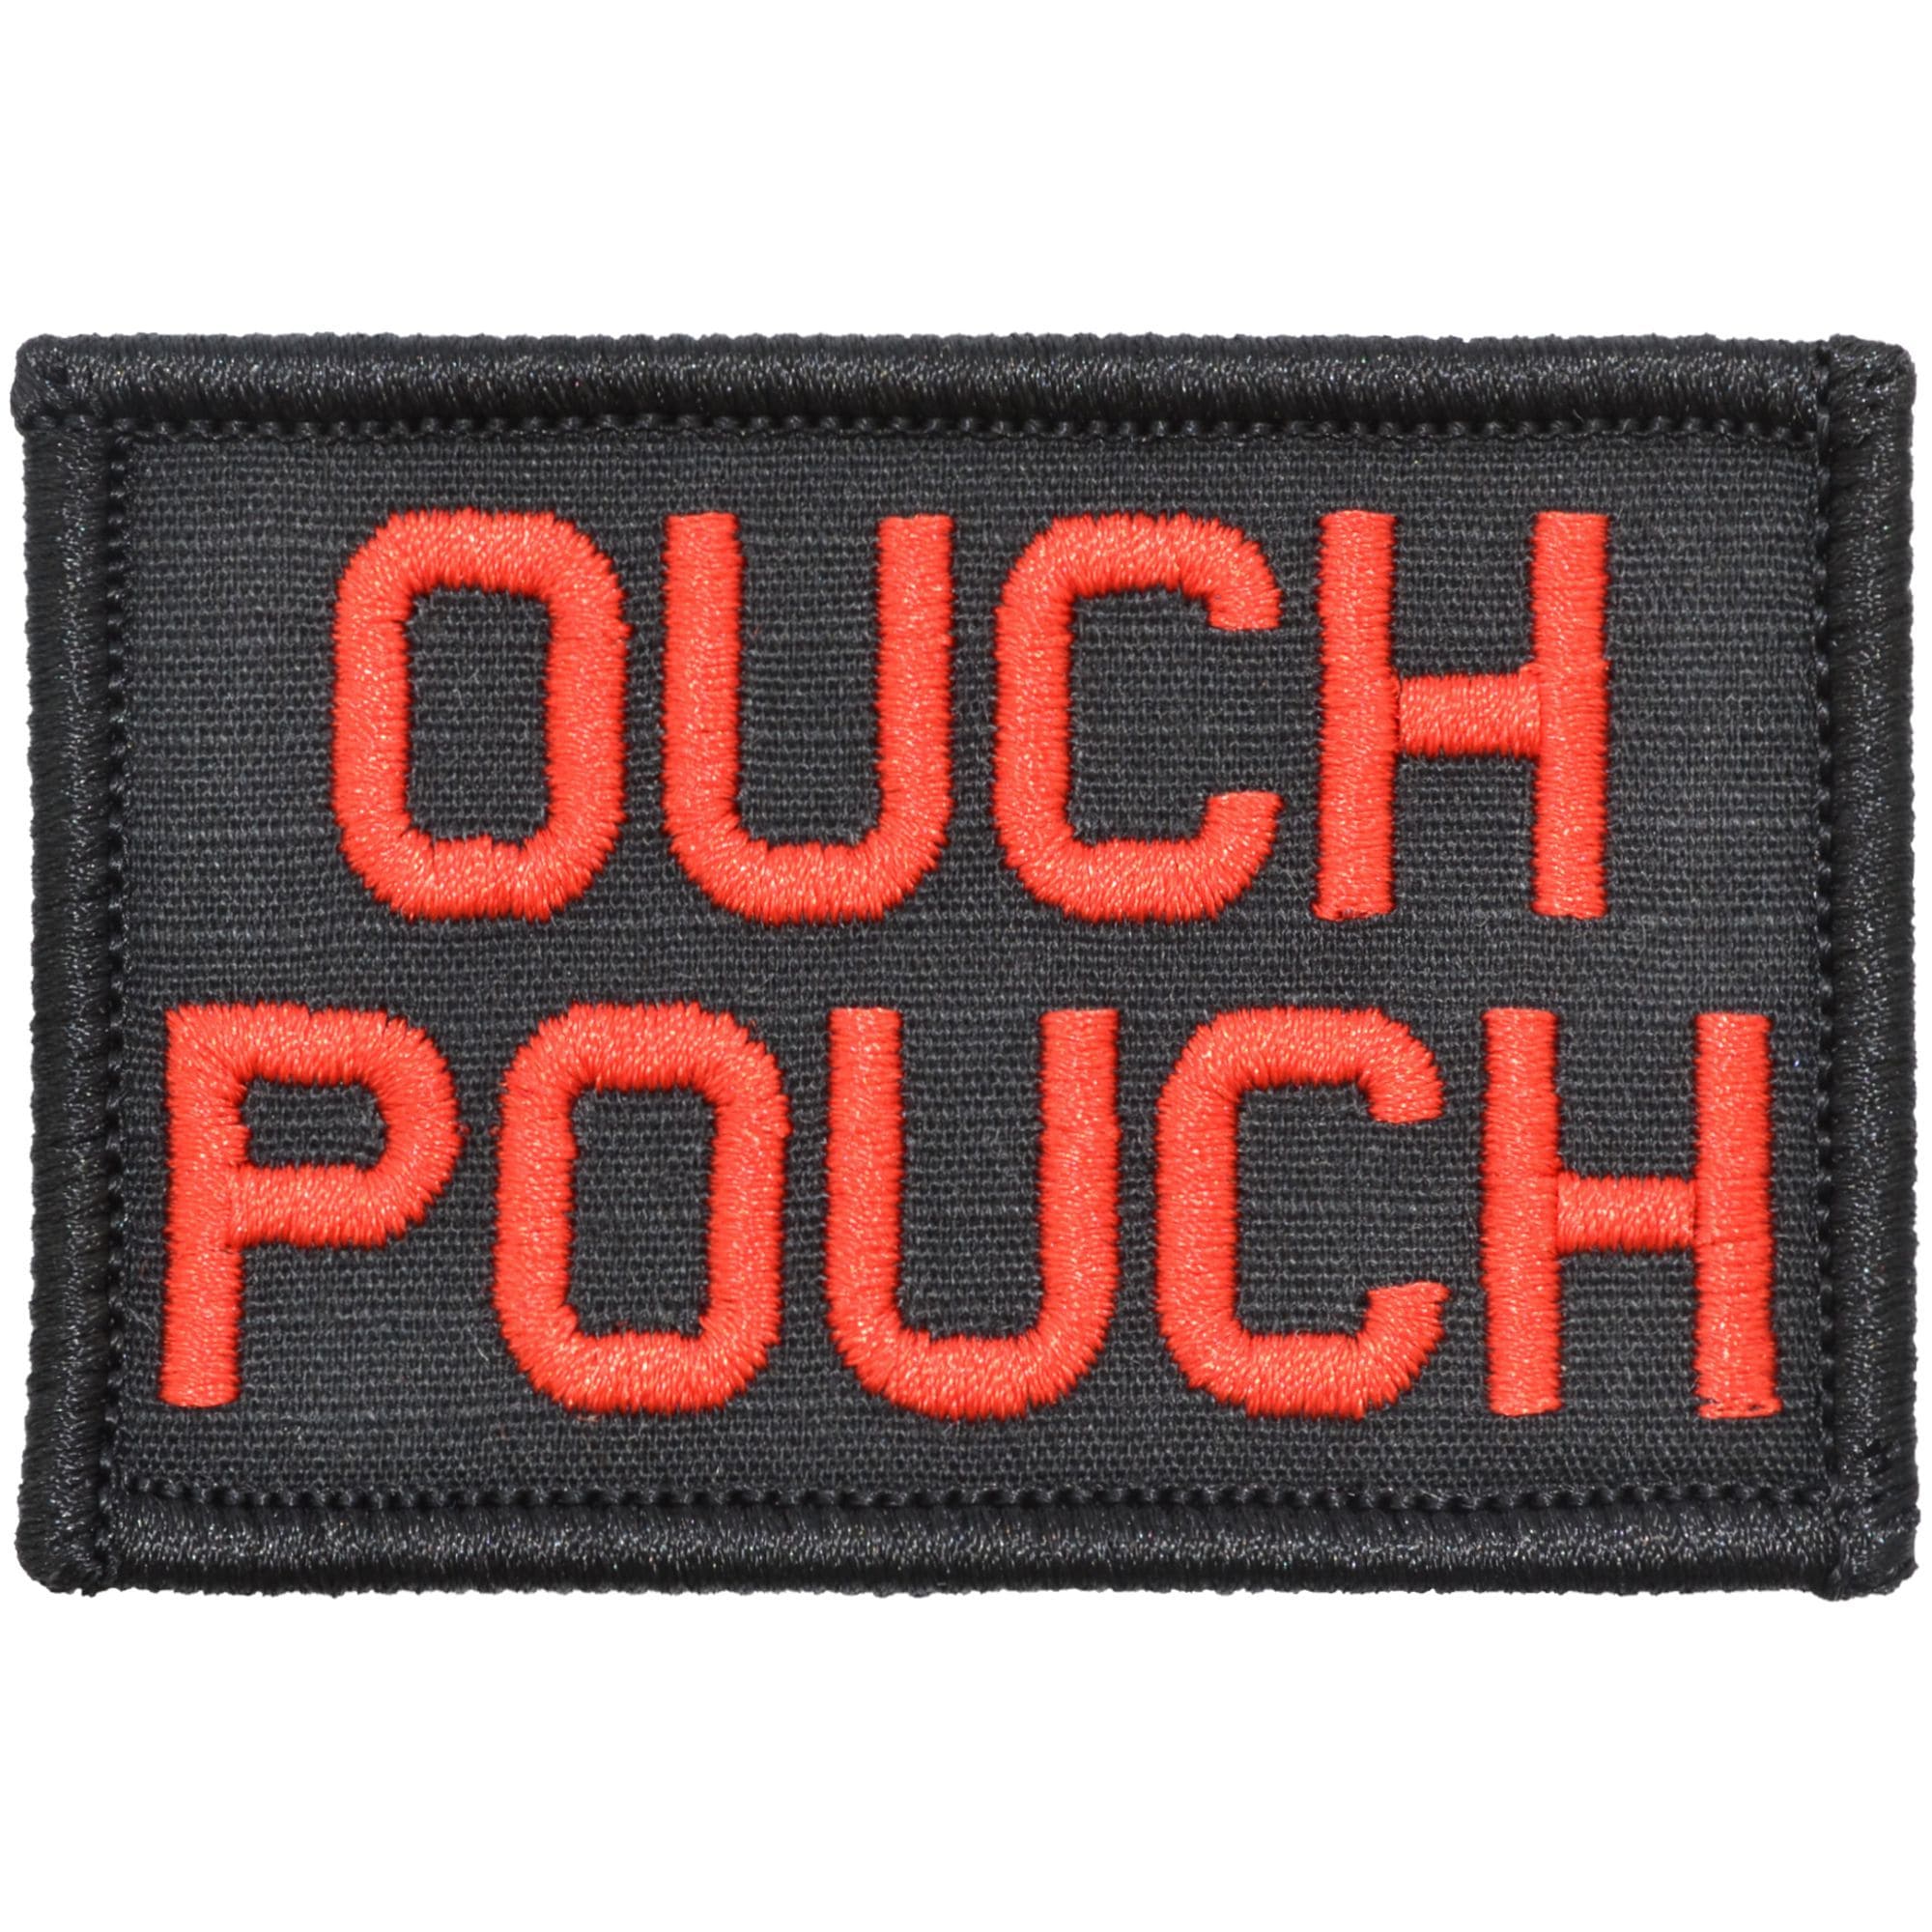  Ouch Pouch